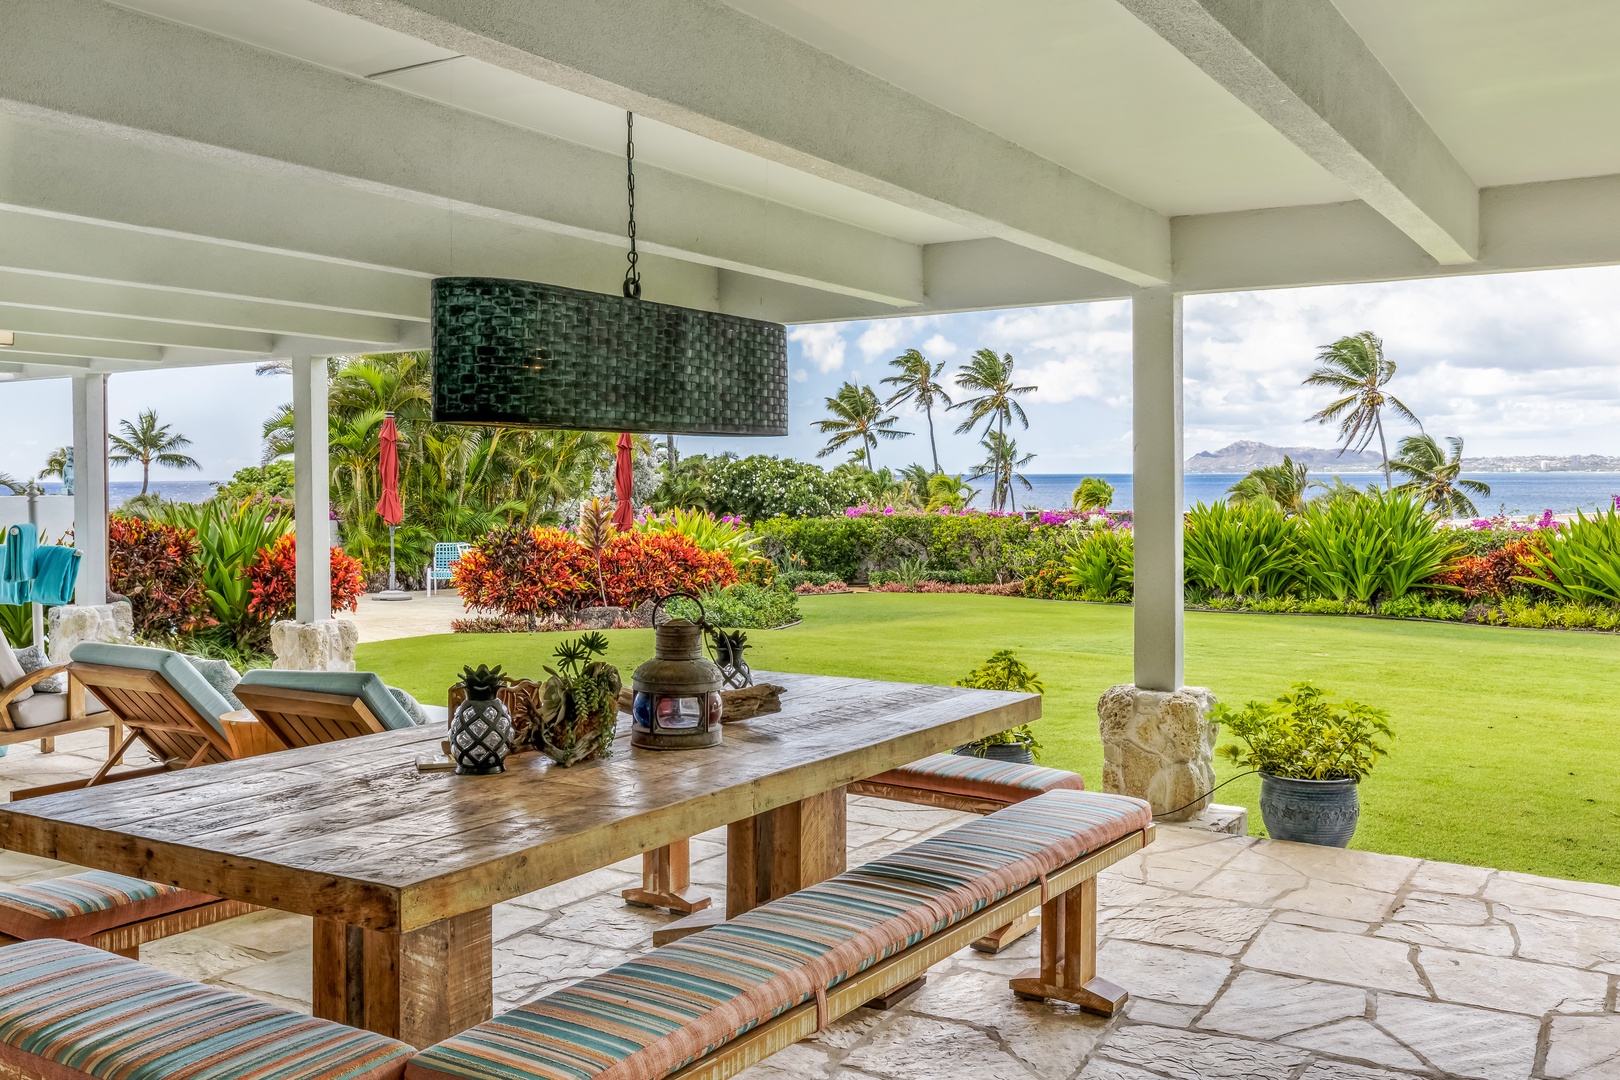 Honolulu Vacation Rentals, Hale Ola - Dine outside under the covered lanai